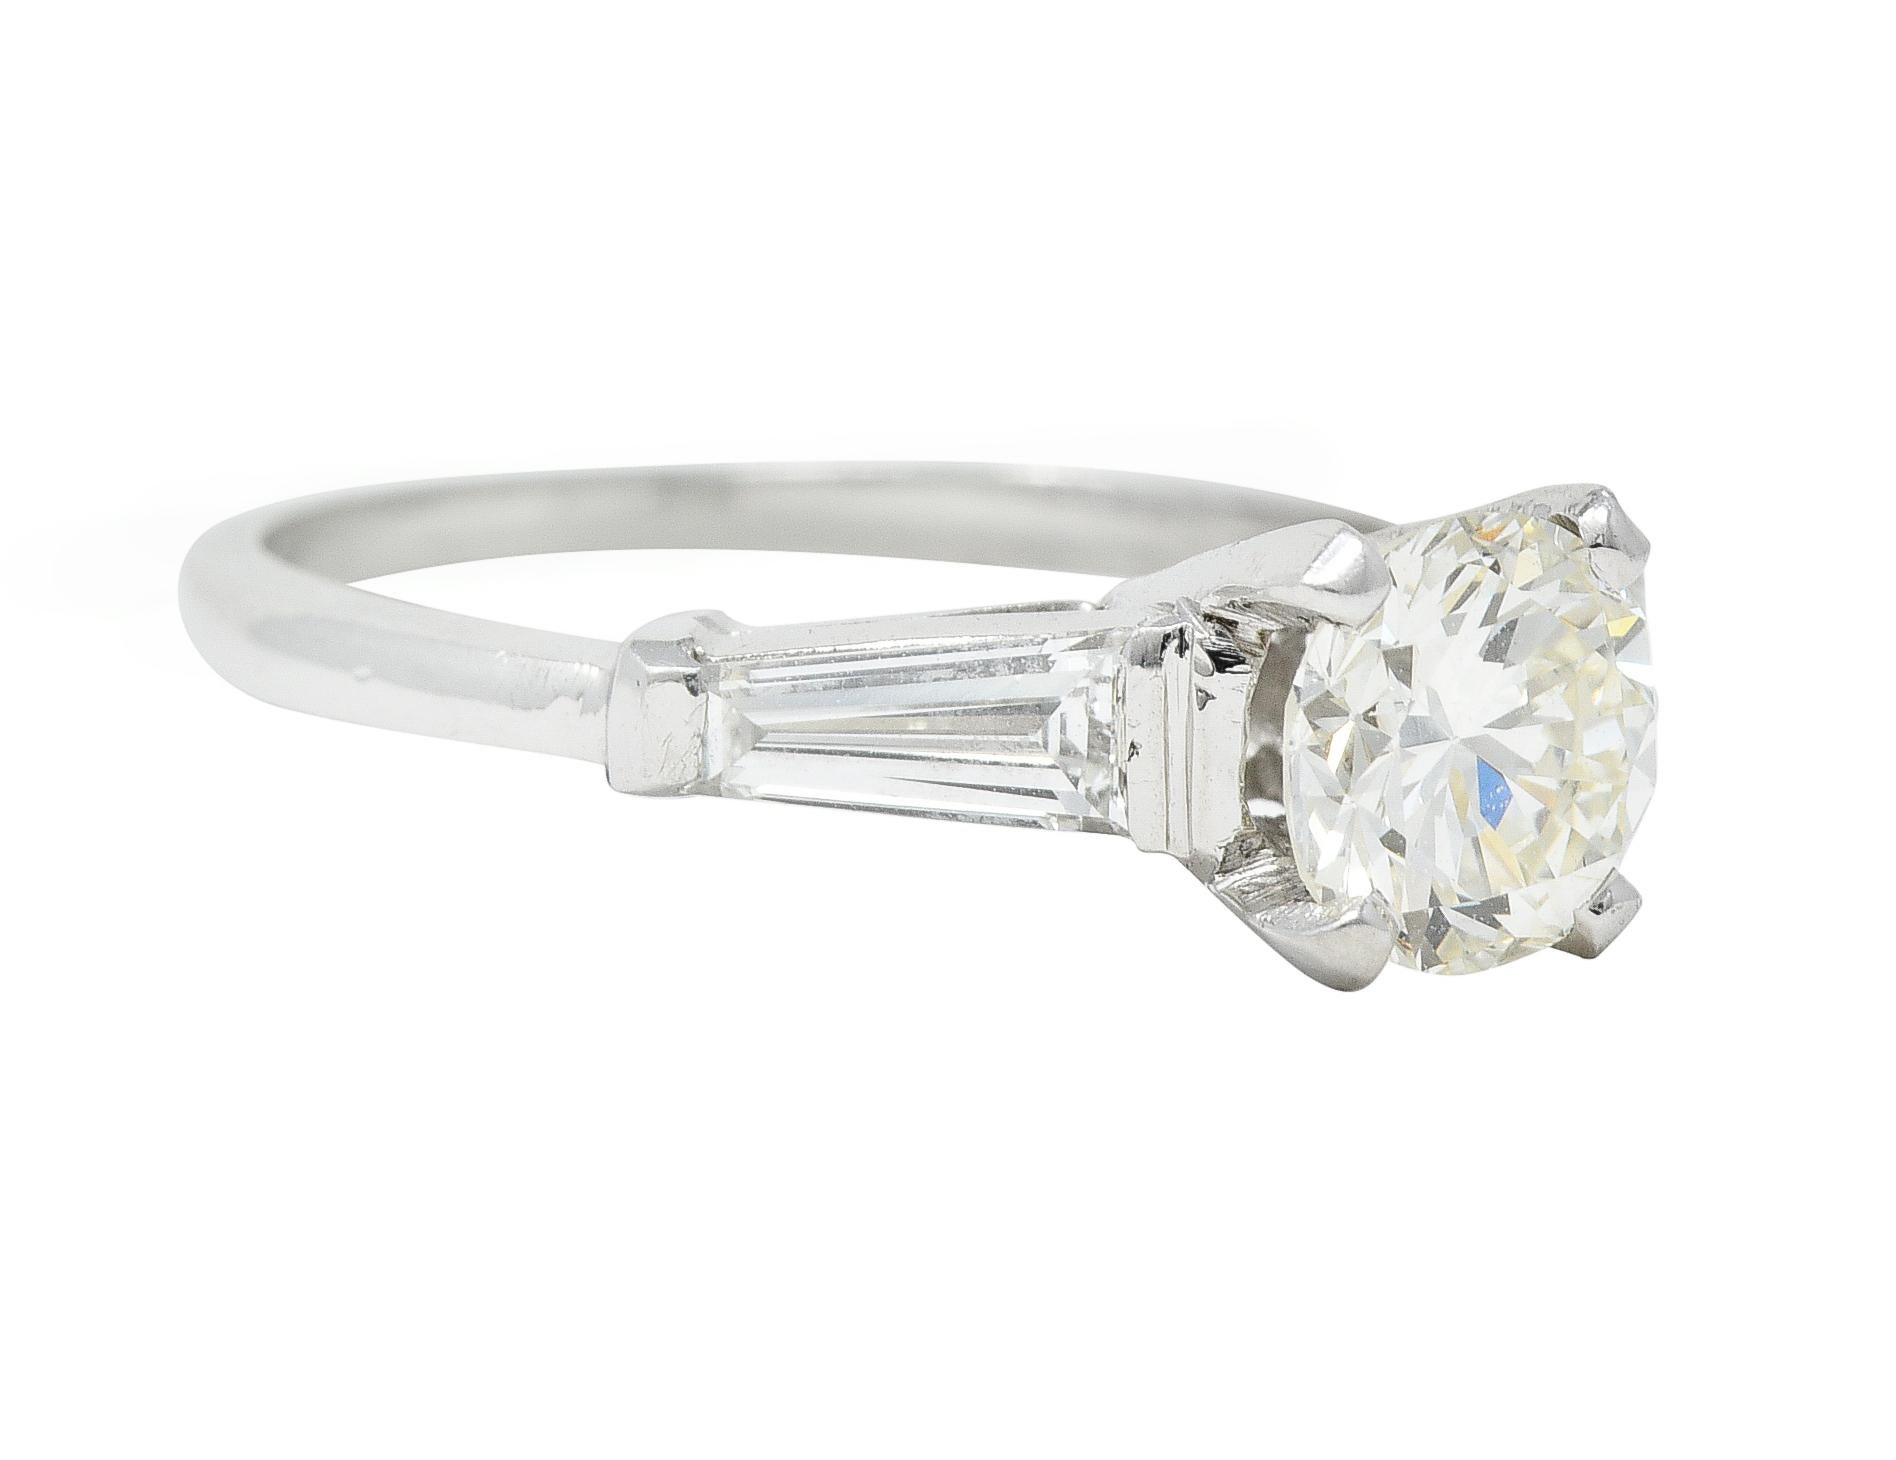 Centering an old European cut diamond weighing 1.07 carats - L color with VS2 clarity
Prong set in a basket and flanked by tapered baguette-cut diamonds
Weighing approximately 0.54 carat total - well matched to center
Bar set in cathedral style